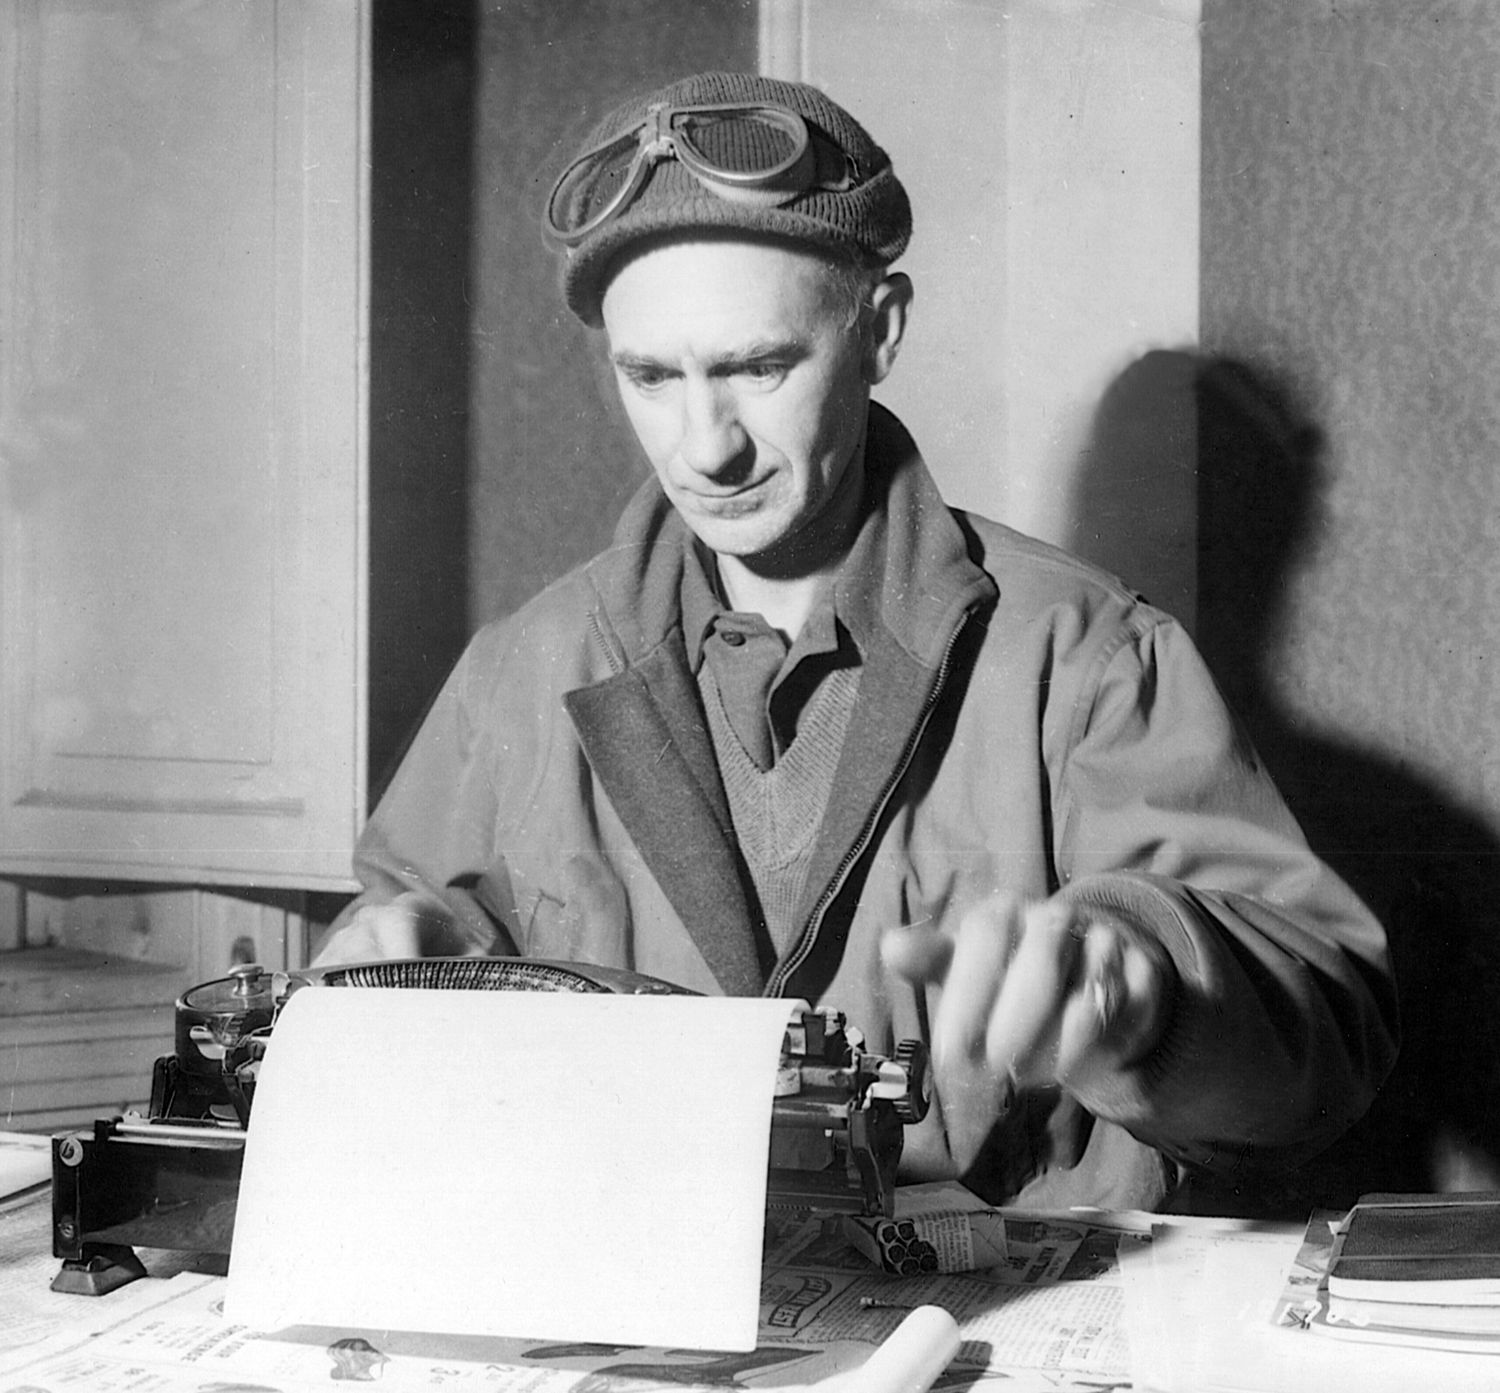 Ernie Pyle, the GIs best friend and chronicler during World War II.